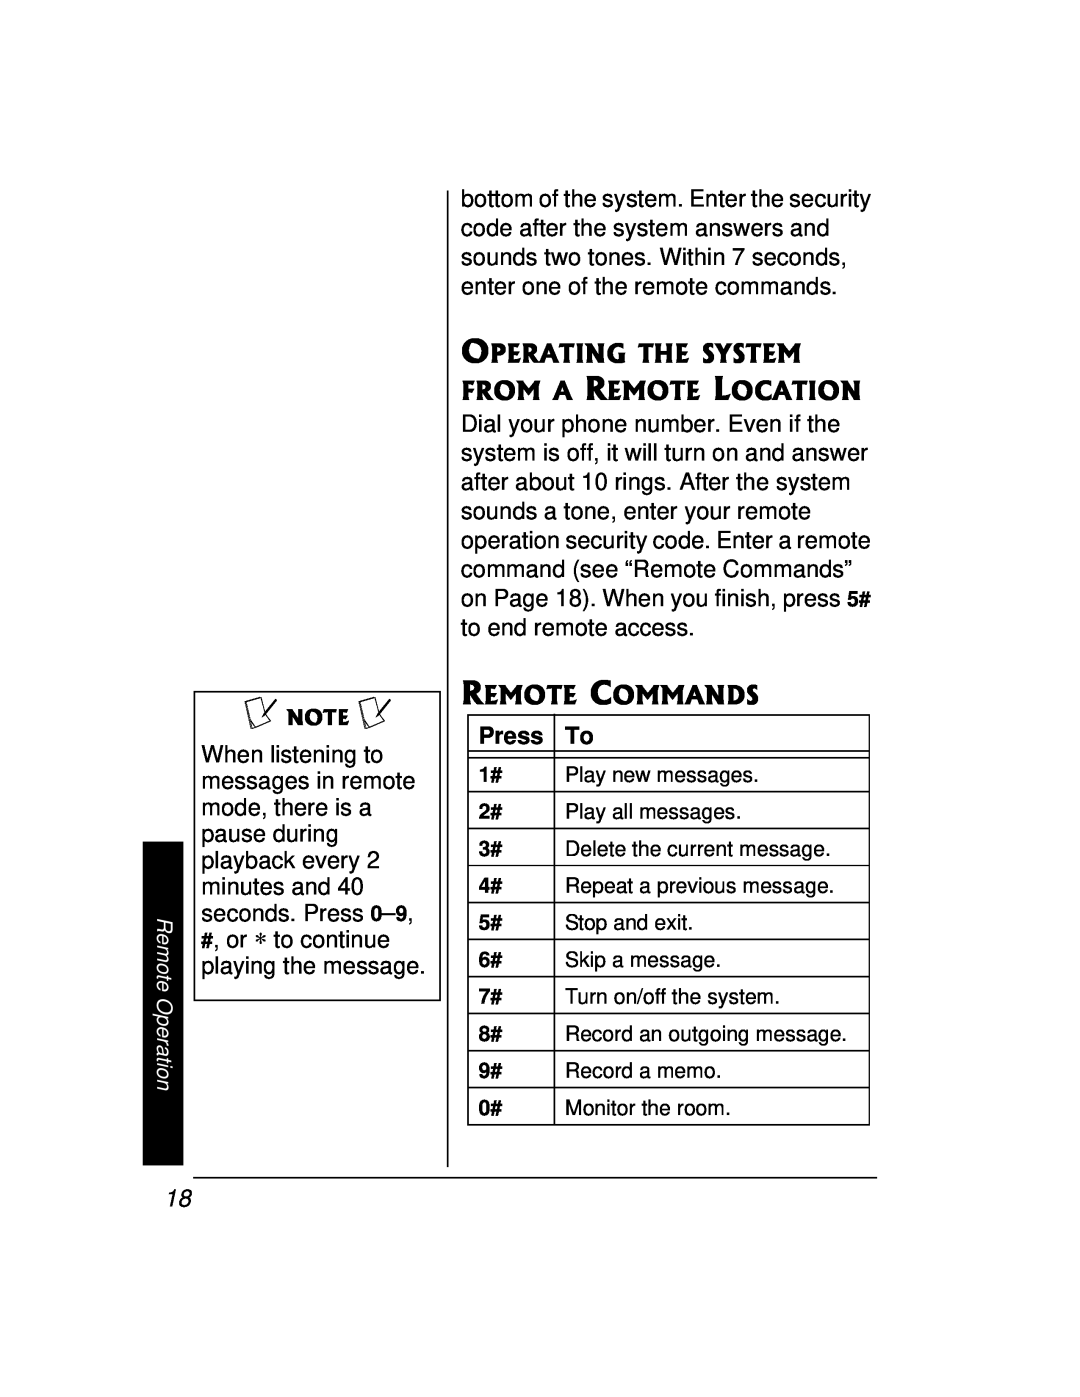 Radio Shack 43-3888 owner manual Operating The System From A Remote Location, Remote Commands, Press 